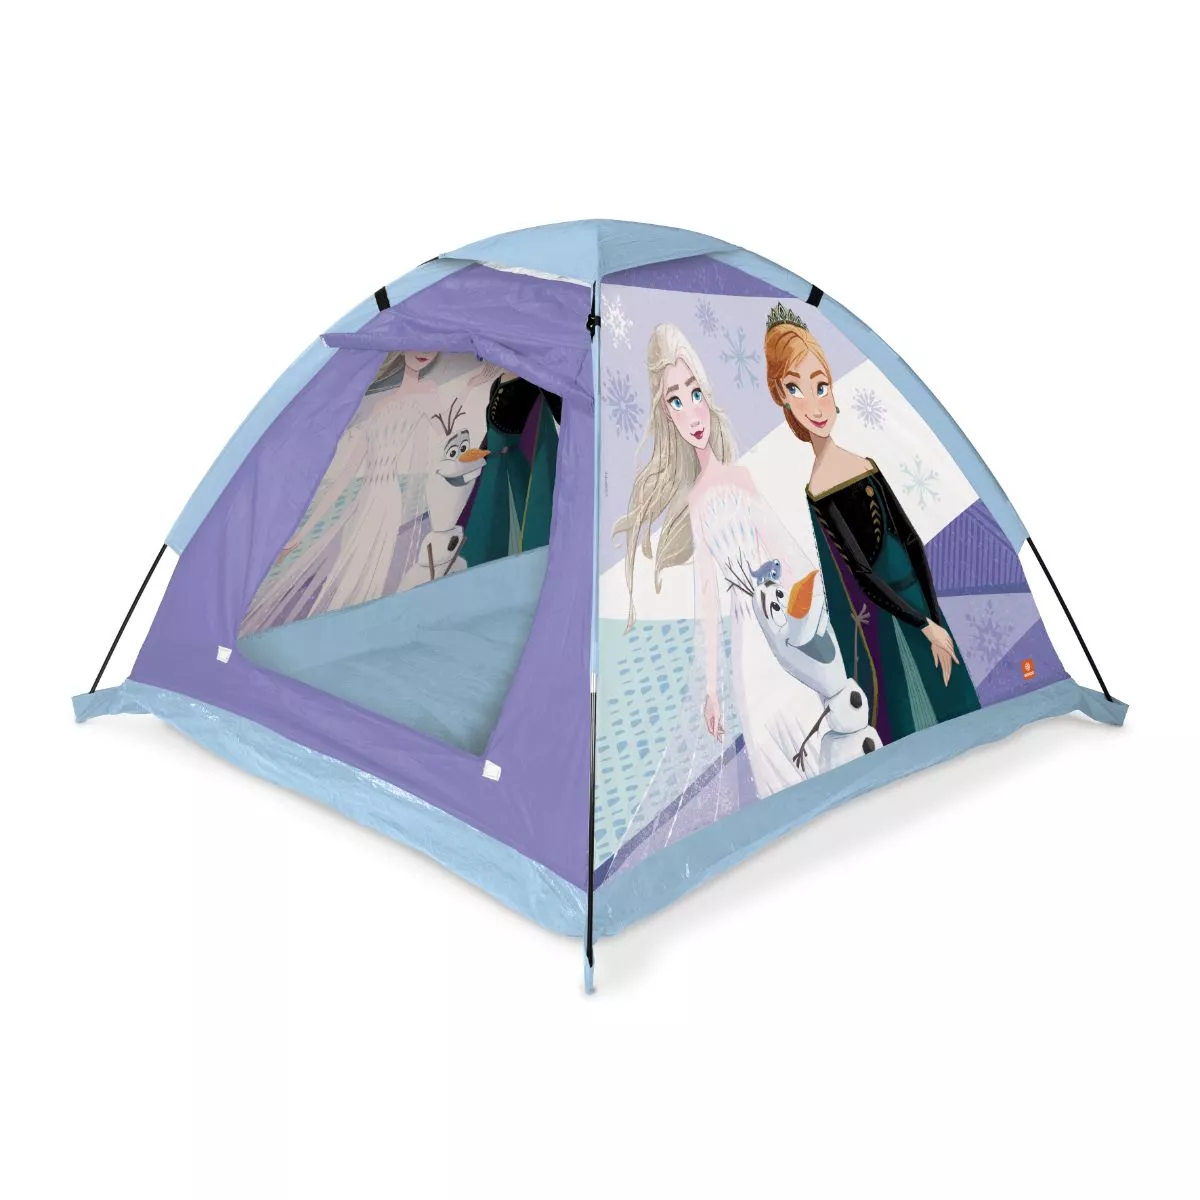 Cort camping FROZEN 1